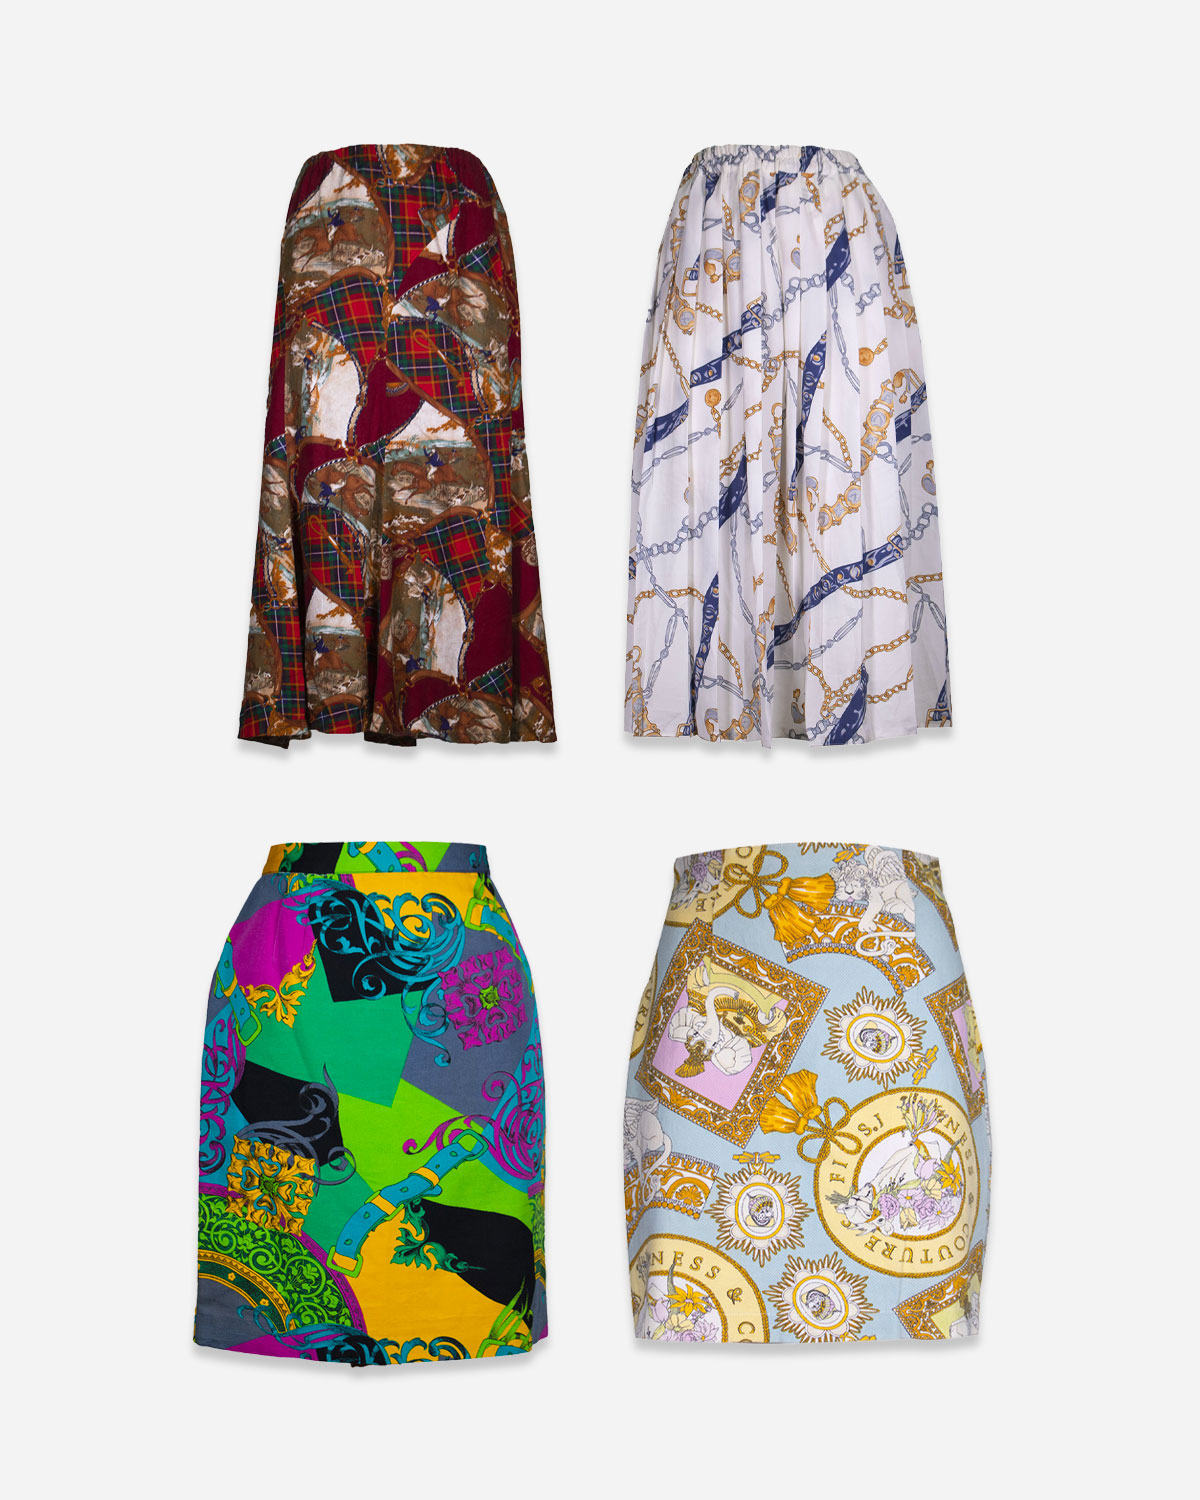 Baroque patterned skirts for women: 4 pieces